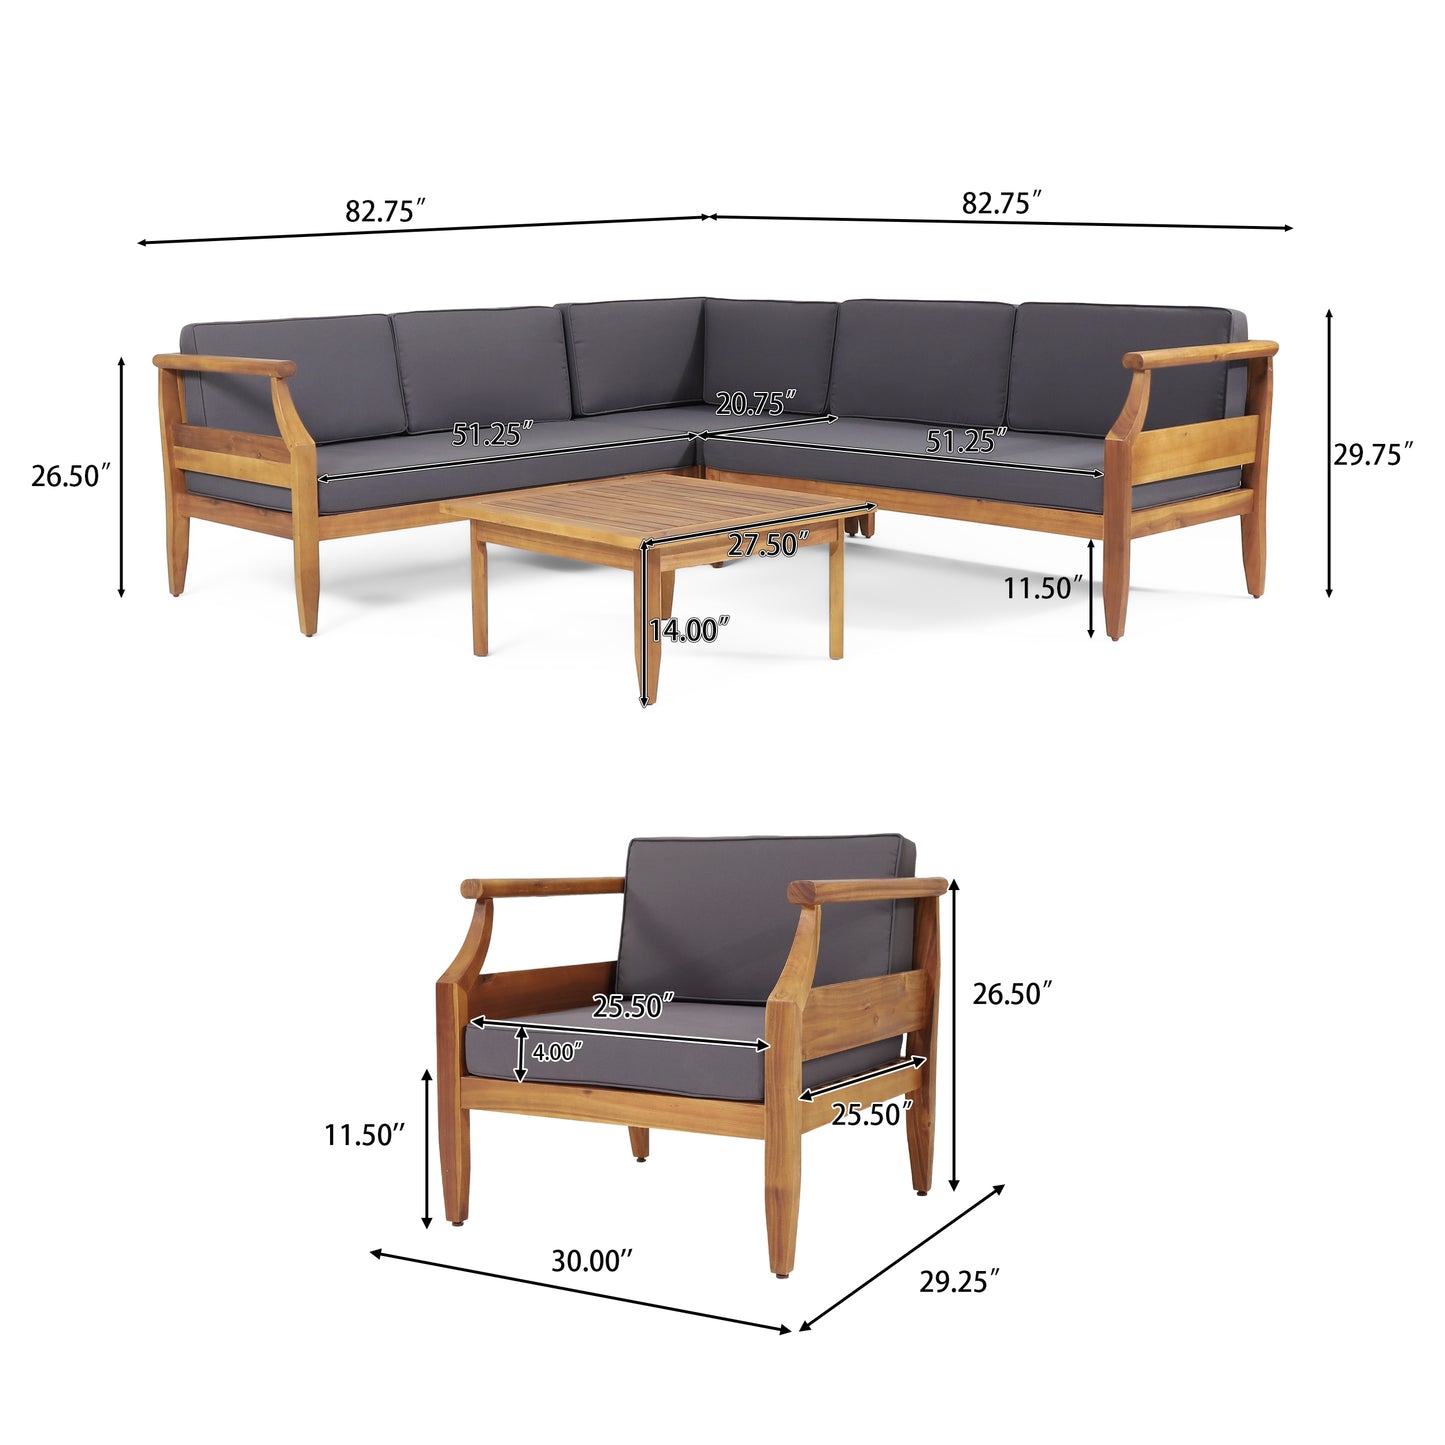 Bianca Outdoor Mid-Century Modern Acacia Wood 5 Seater Sectional Chat Set with Club Chair, Teak and Dark Gray